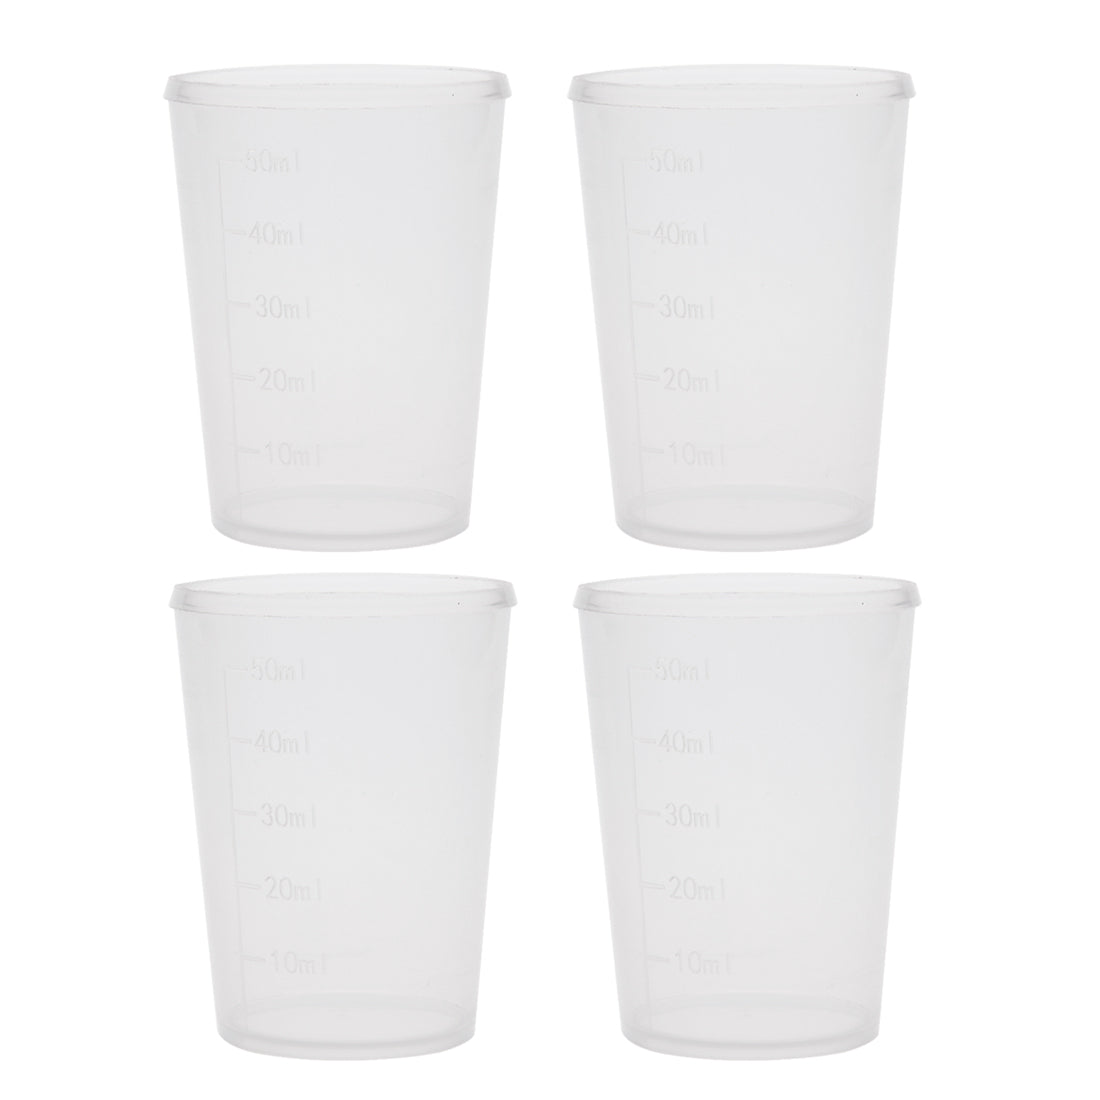 uxcell Uxcell 4pcs Measuring Cup Lab PP Plastic Graduated Beaker 50ml